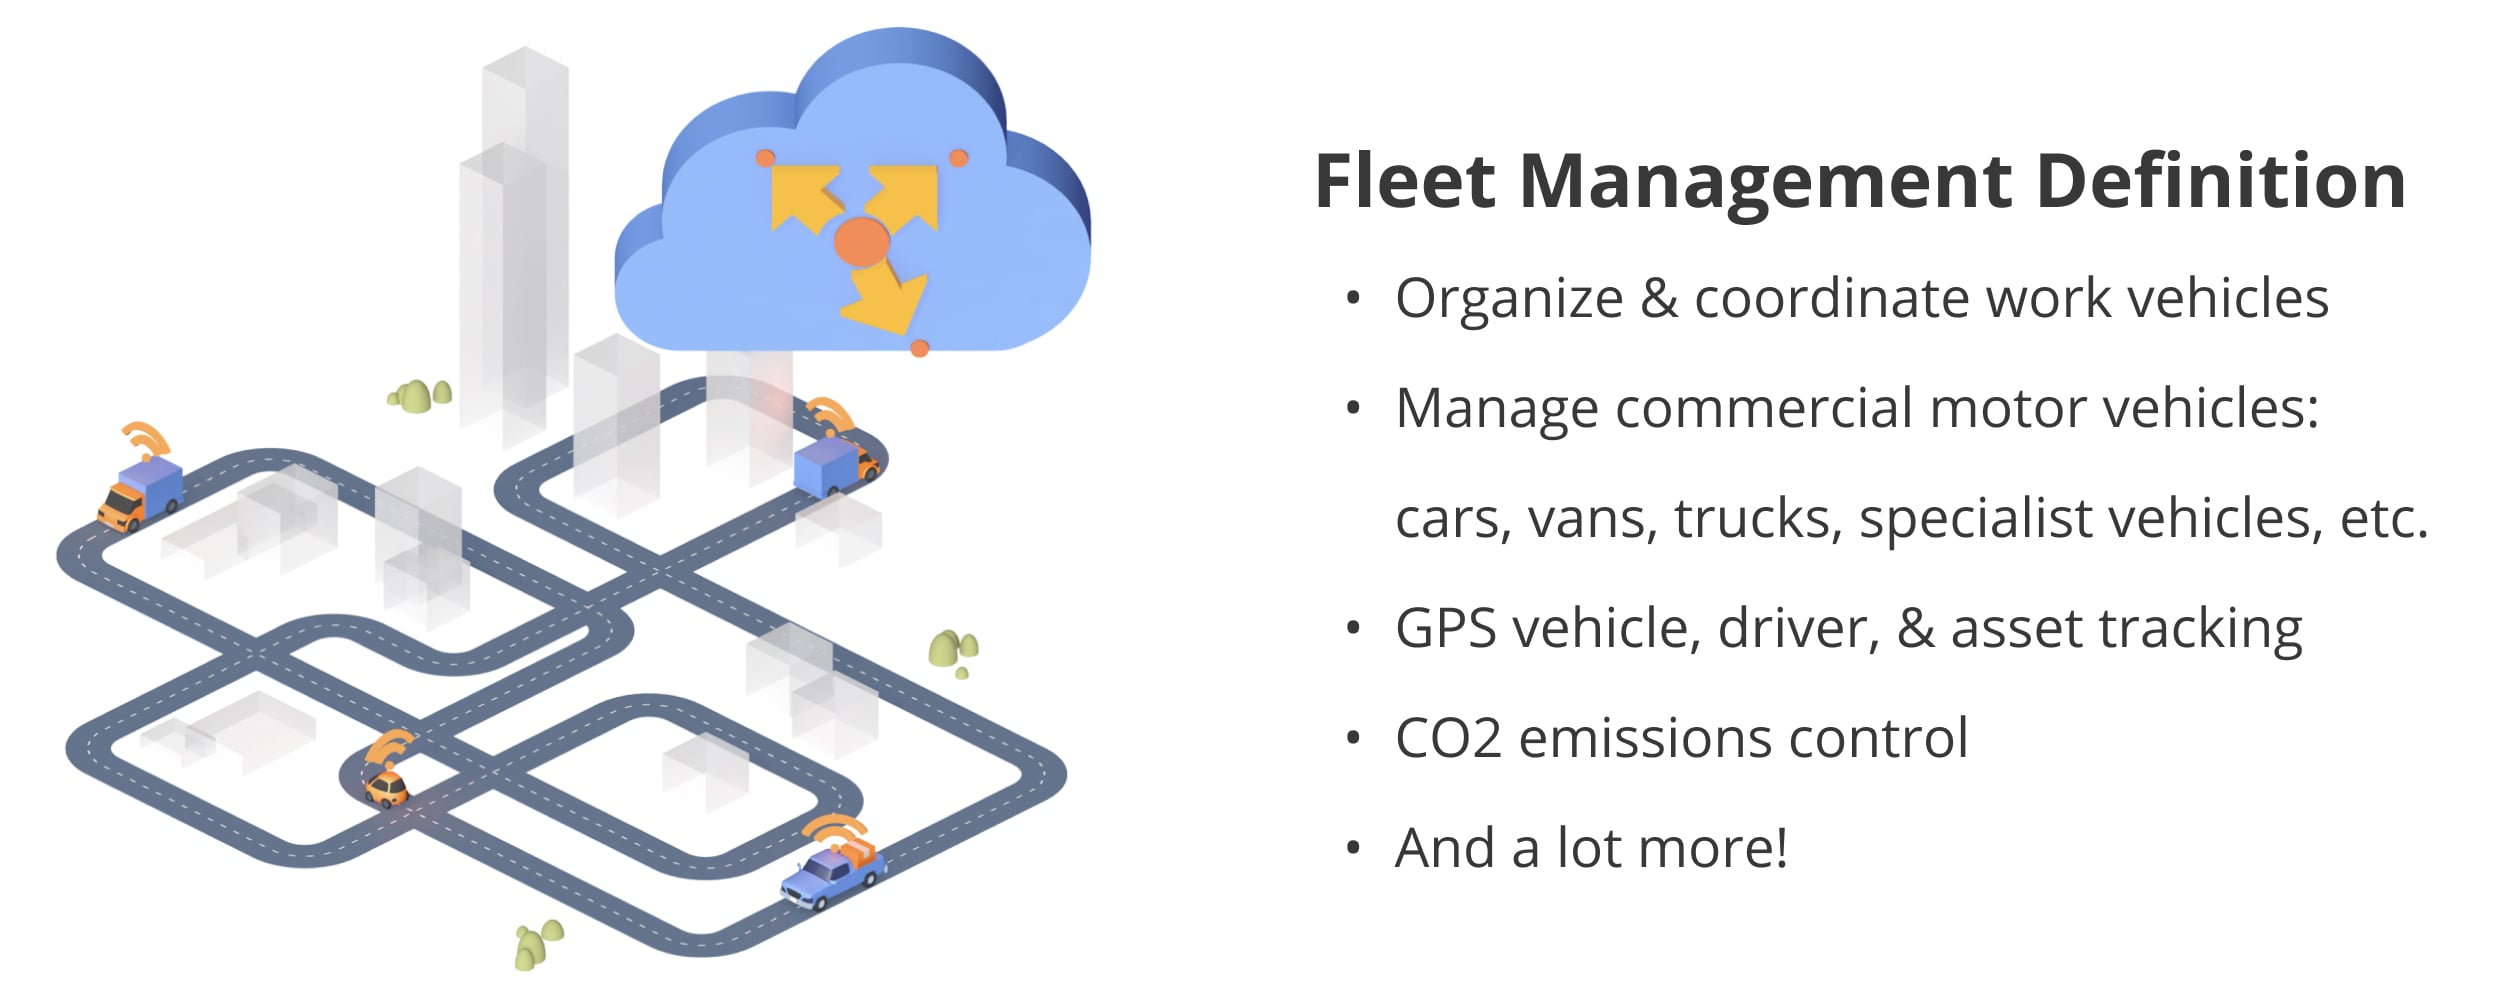 The definition of fleet management explained.